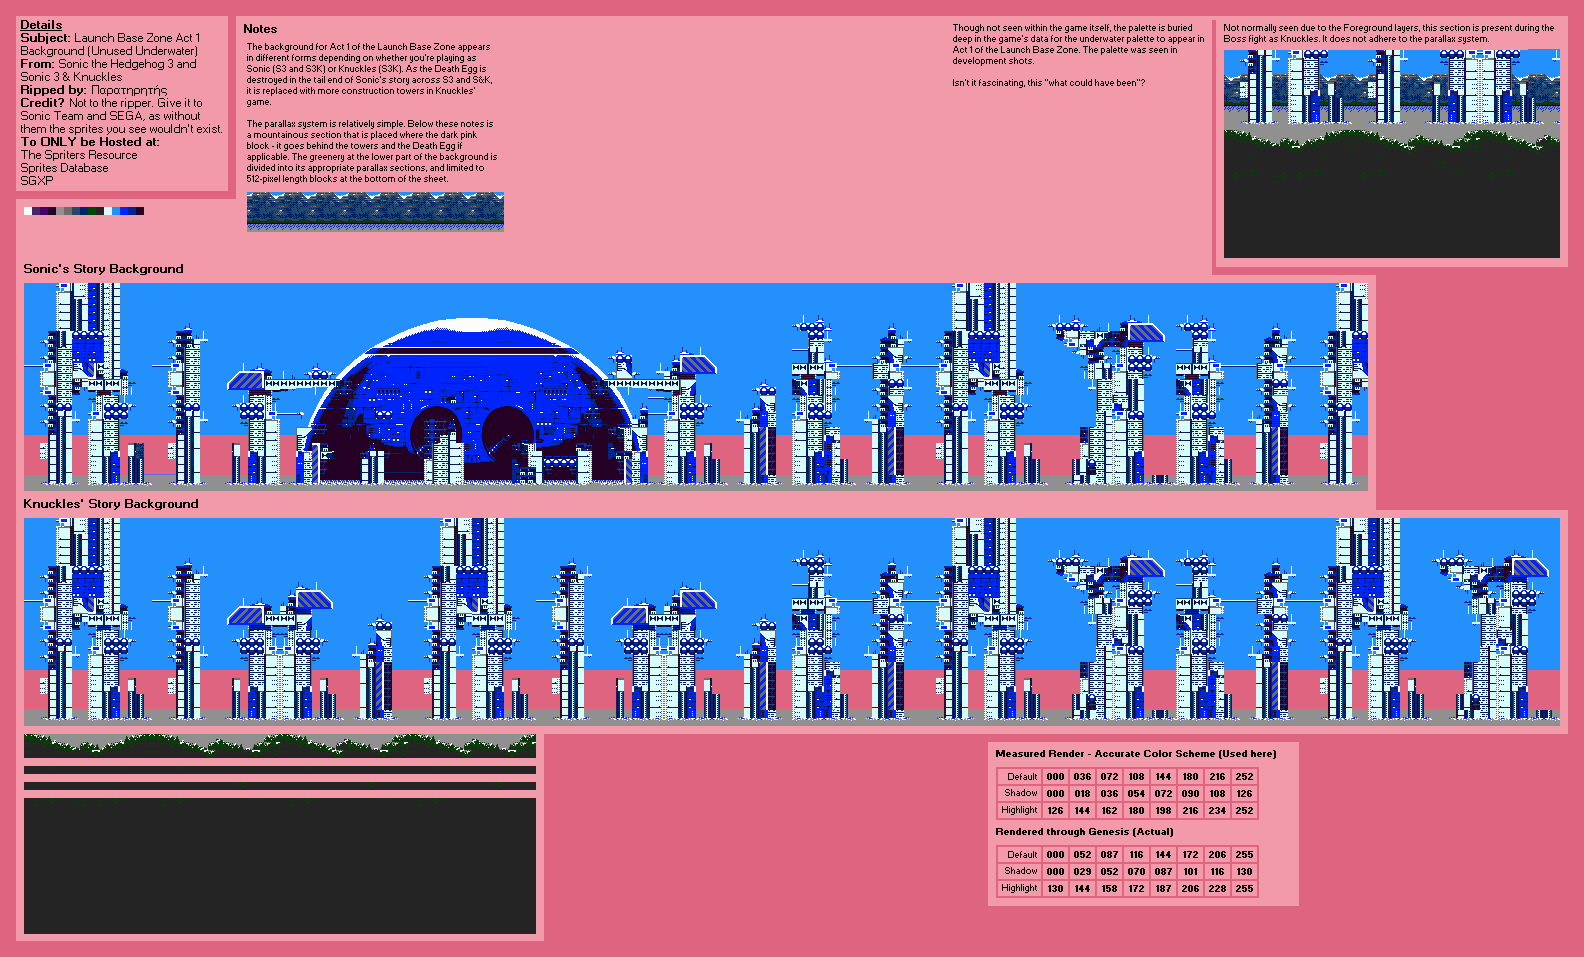 Sonic the Hedgehog 3 - Launch Base Zone Act 1 Background (Underwater)